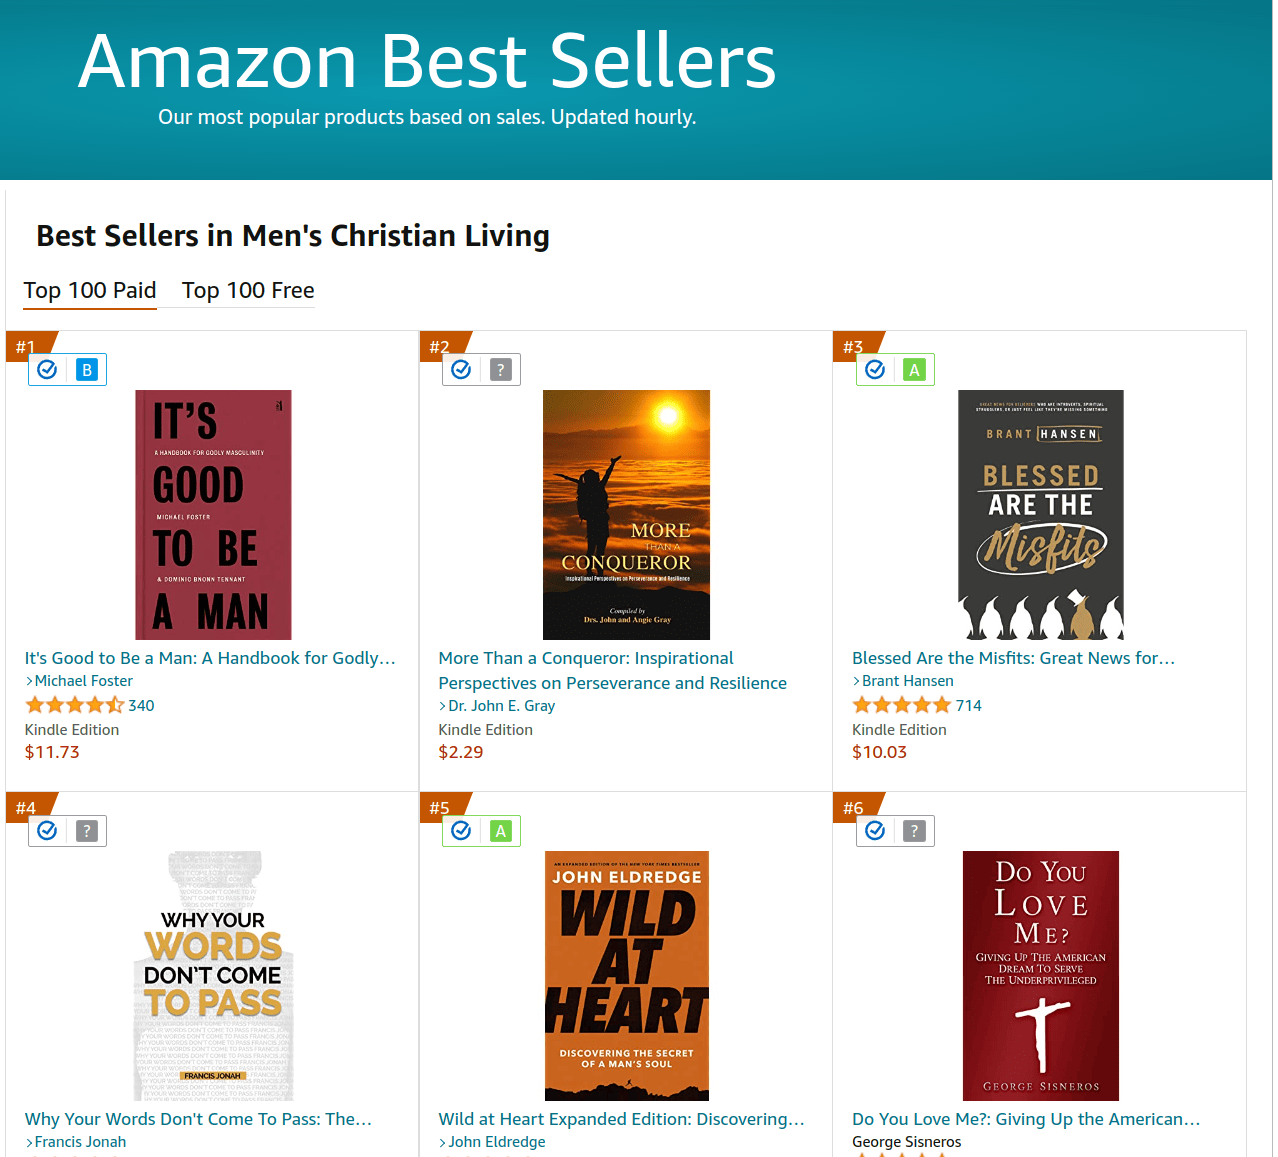 Thanks to Aimee Byrd, It’s Good To Be A Man is now the #1 bestseller in Men’s Christian Living